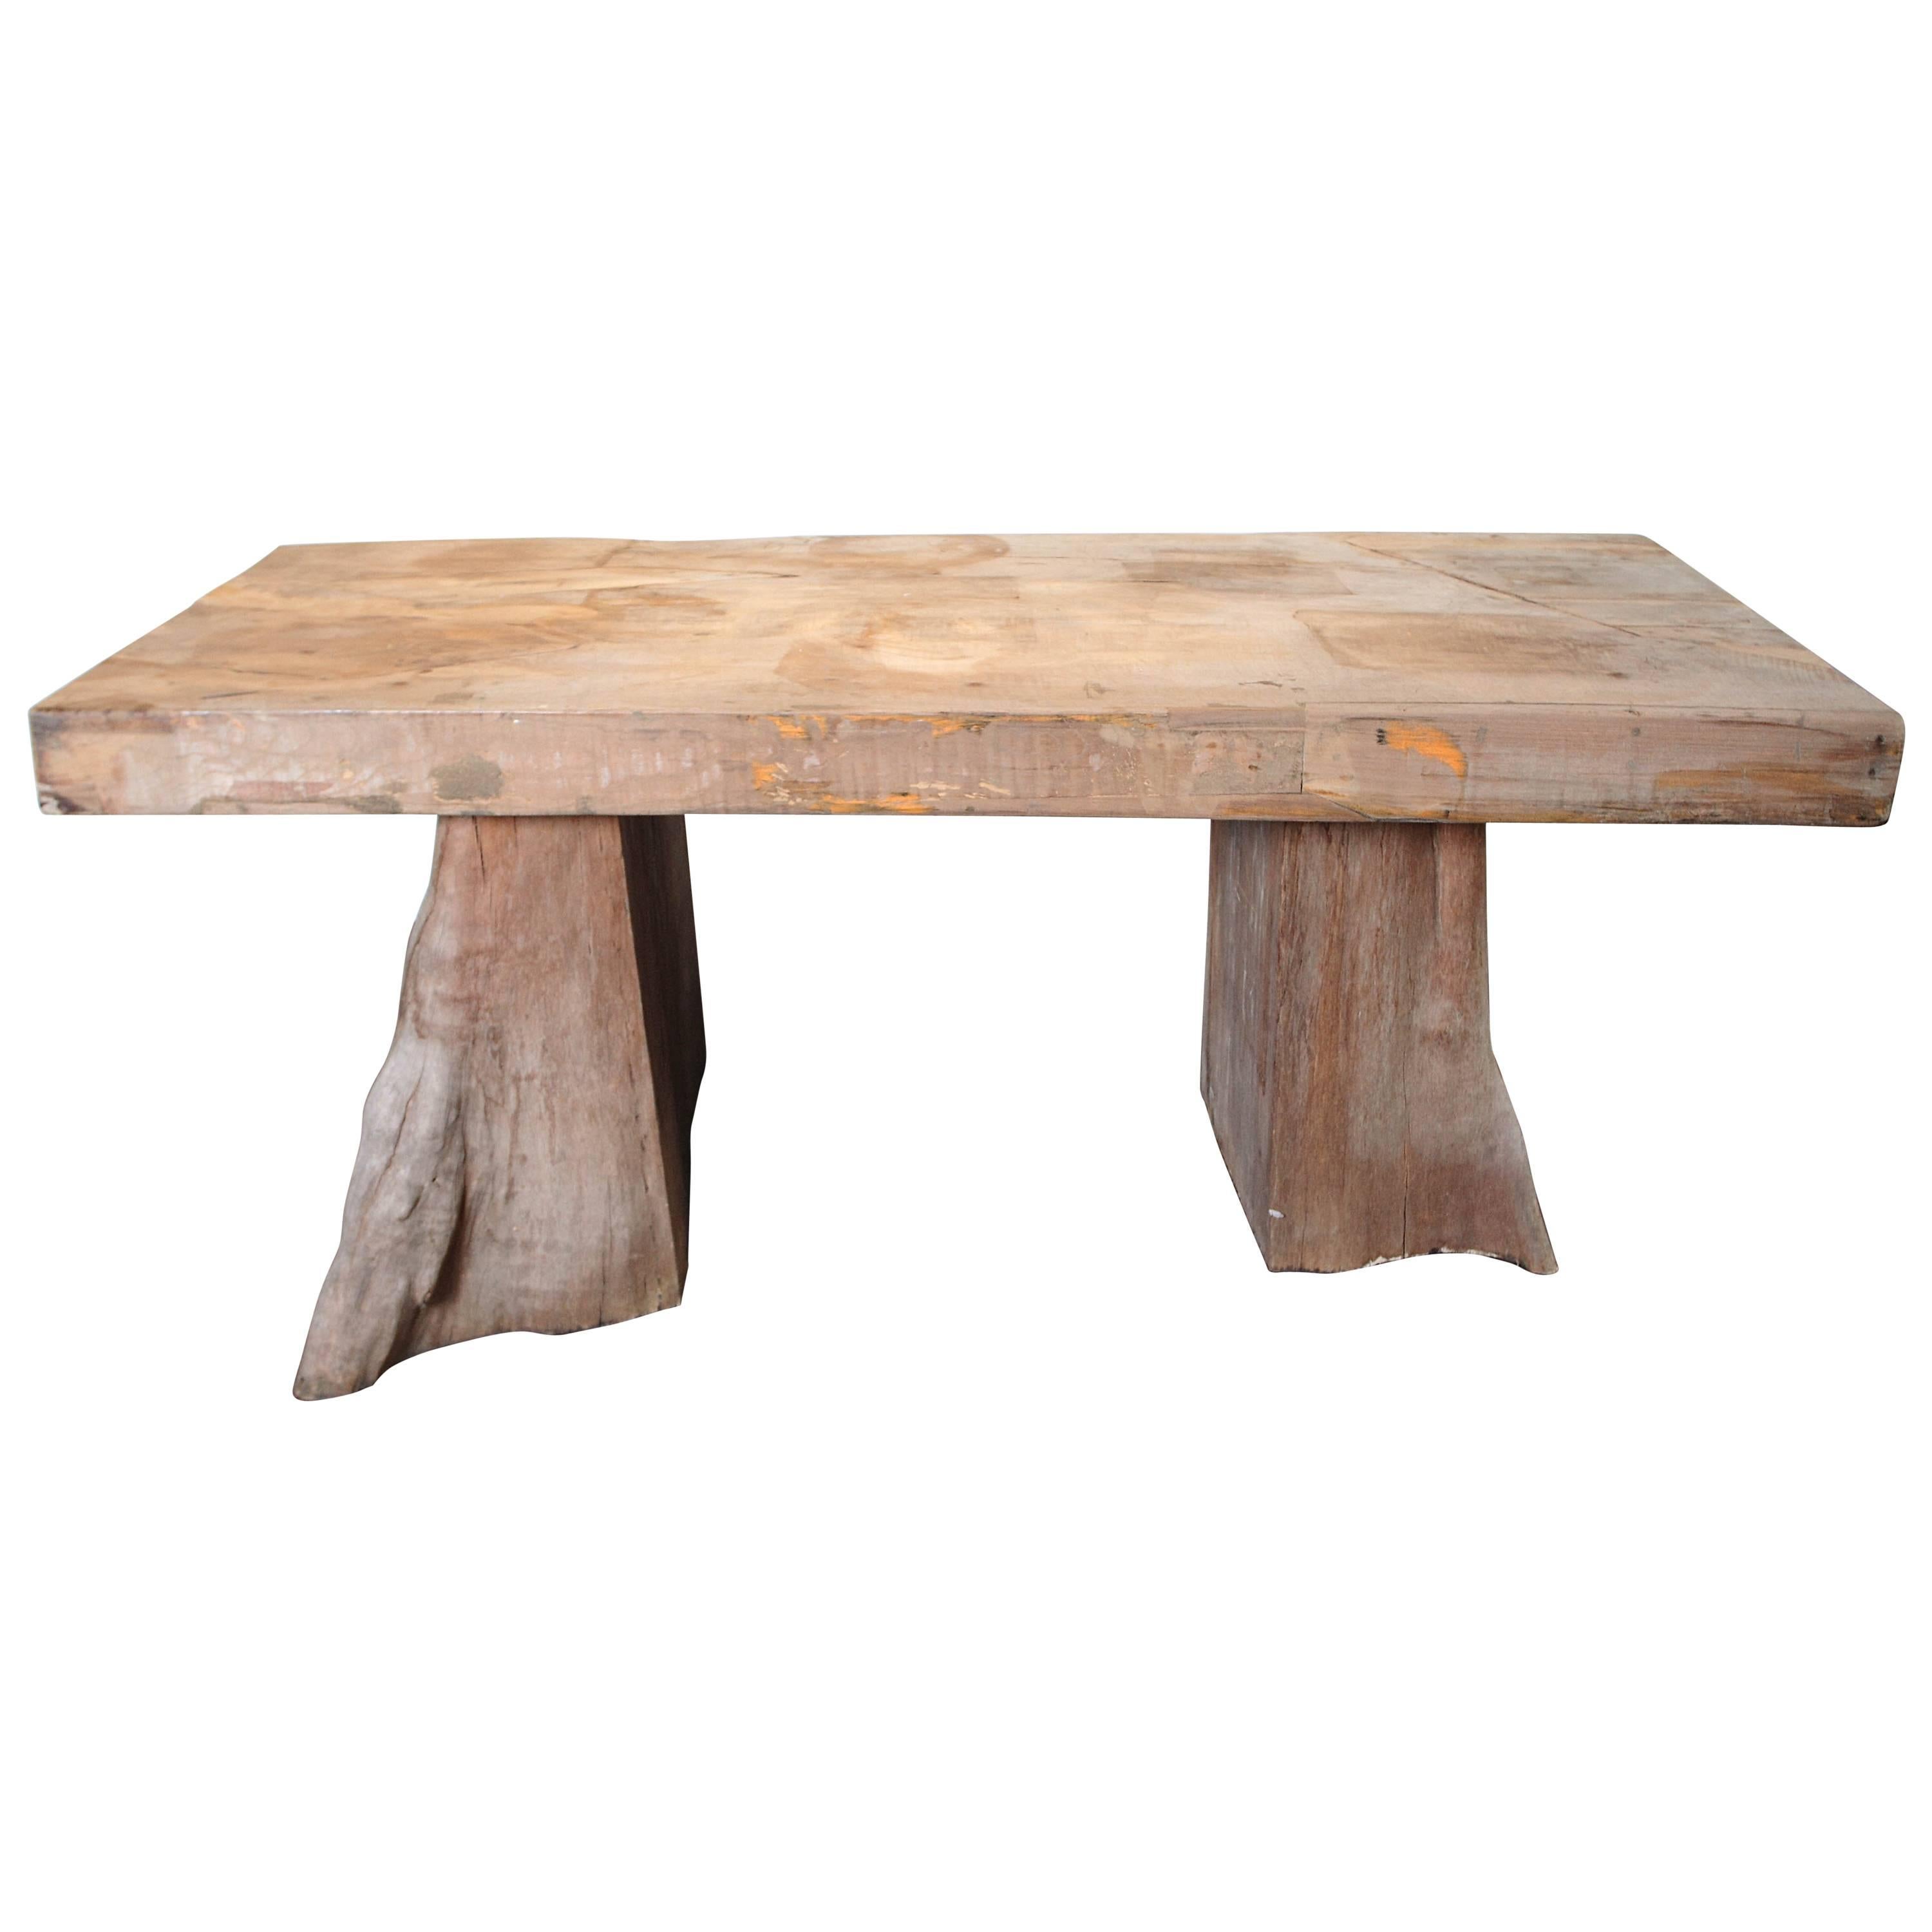 Slab top teak dining table with organic base supports accommodates four to six chairs.
For indoor or outdoor use. Exposed to the sun, teak will  bleach to a greyed white color. Teak is a weather resistant, and bug resistant hard wood.



         